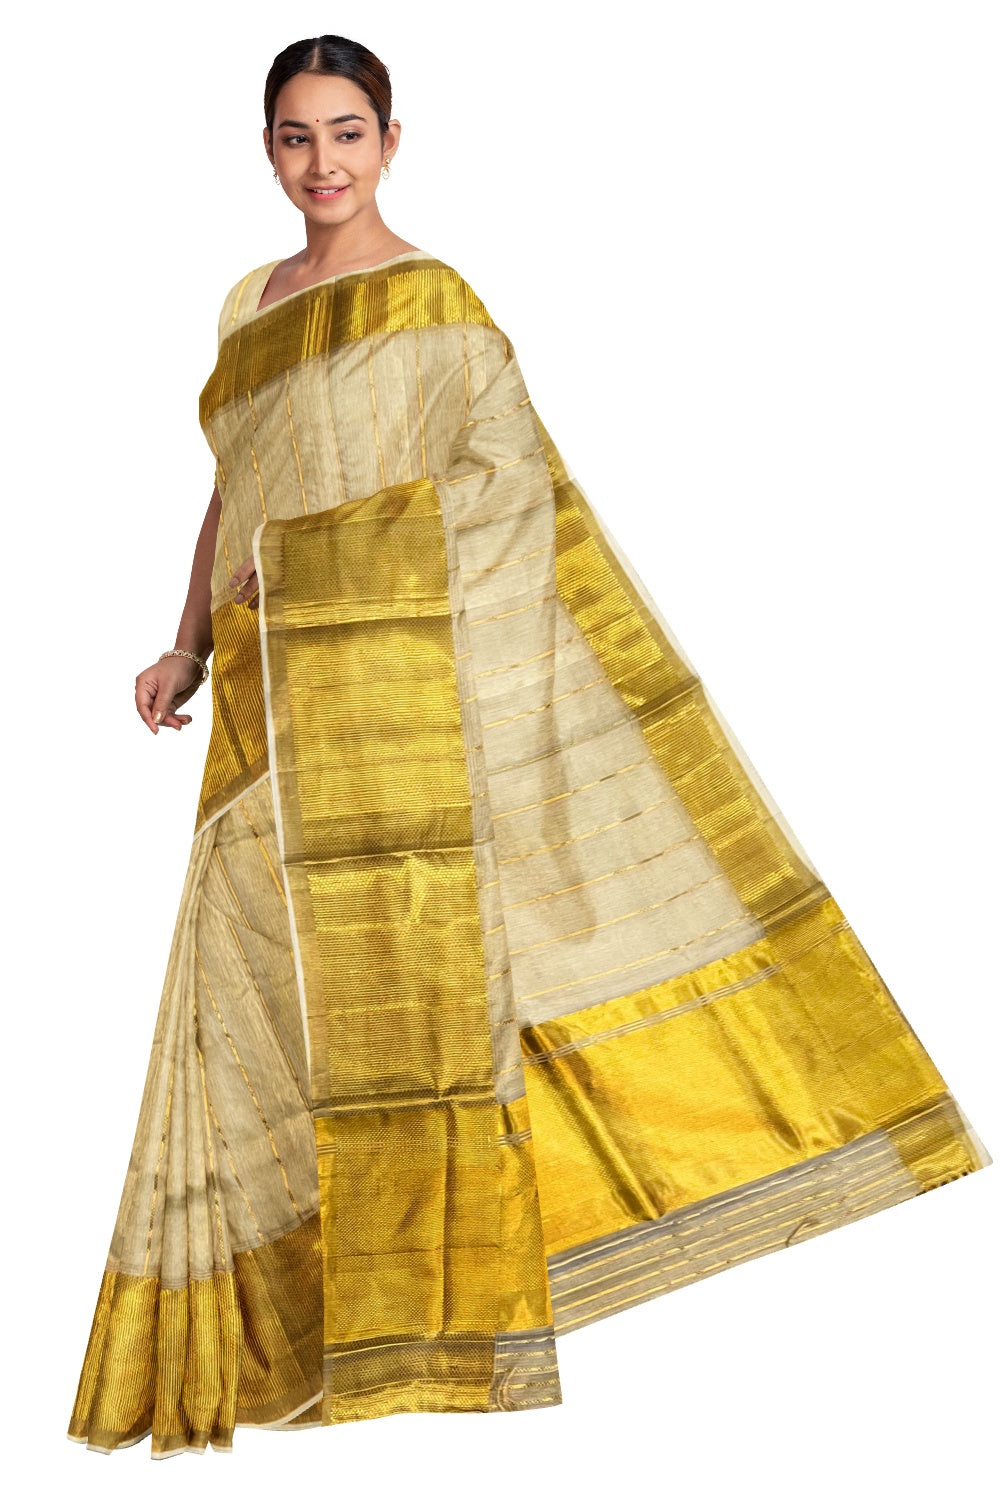 Southloom Premium Kuthampully Handloom Stripes Work Tissue Saree with 12 inch Woven Patterns on Pallu